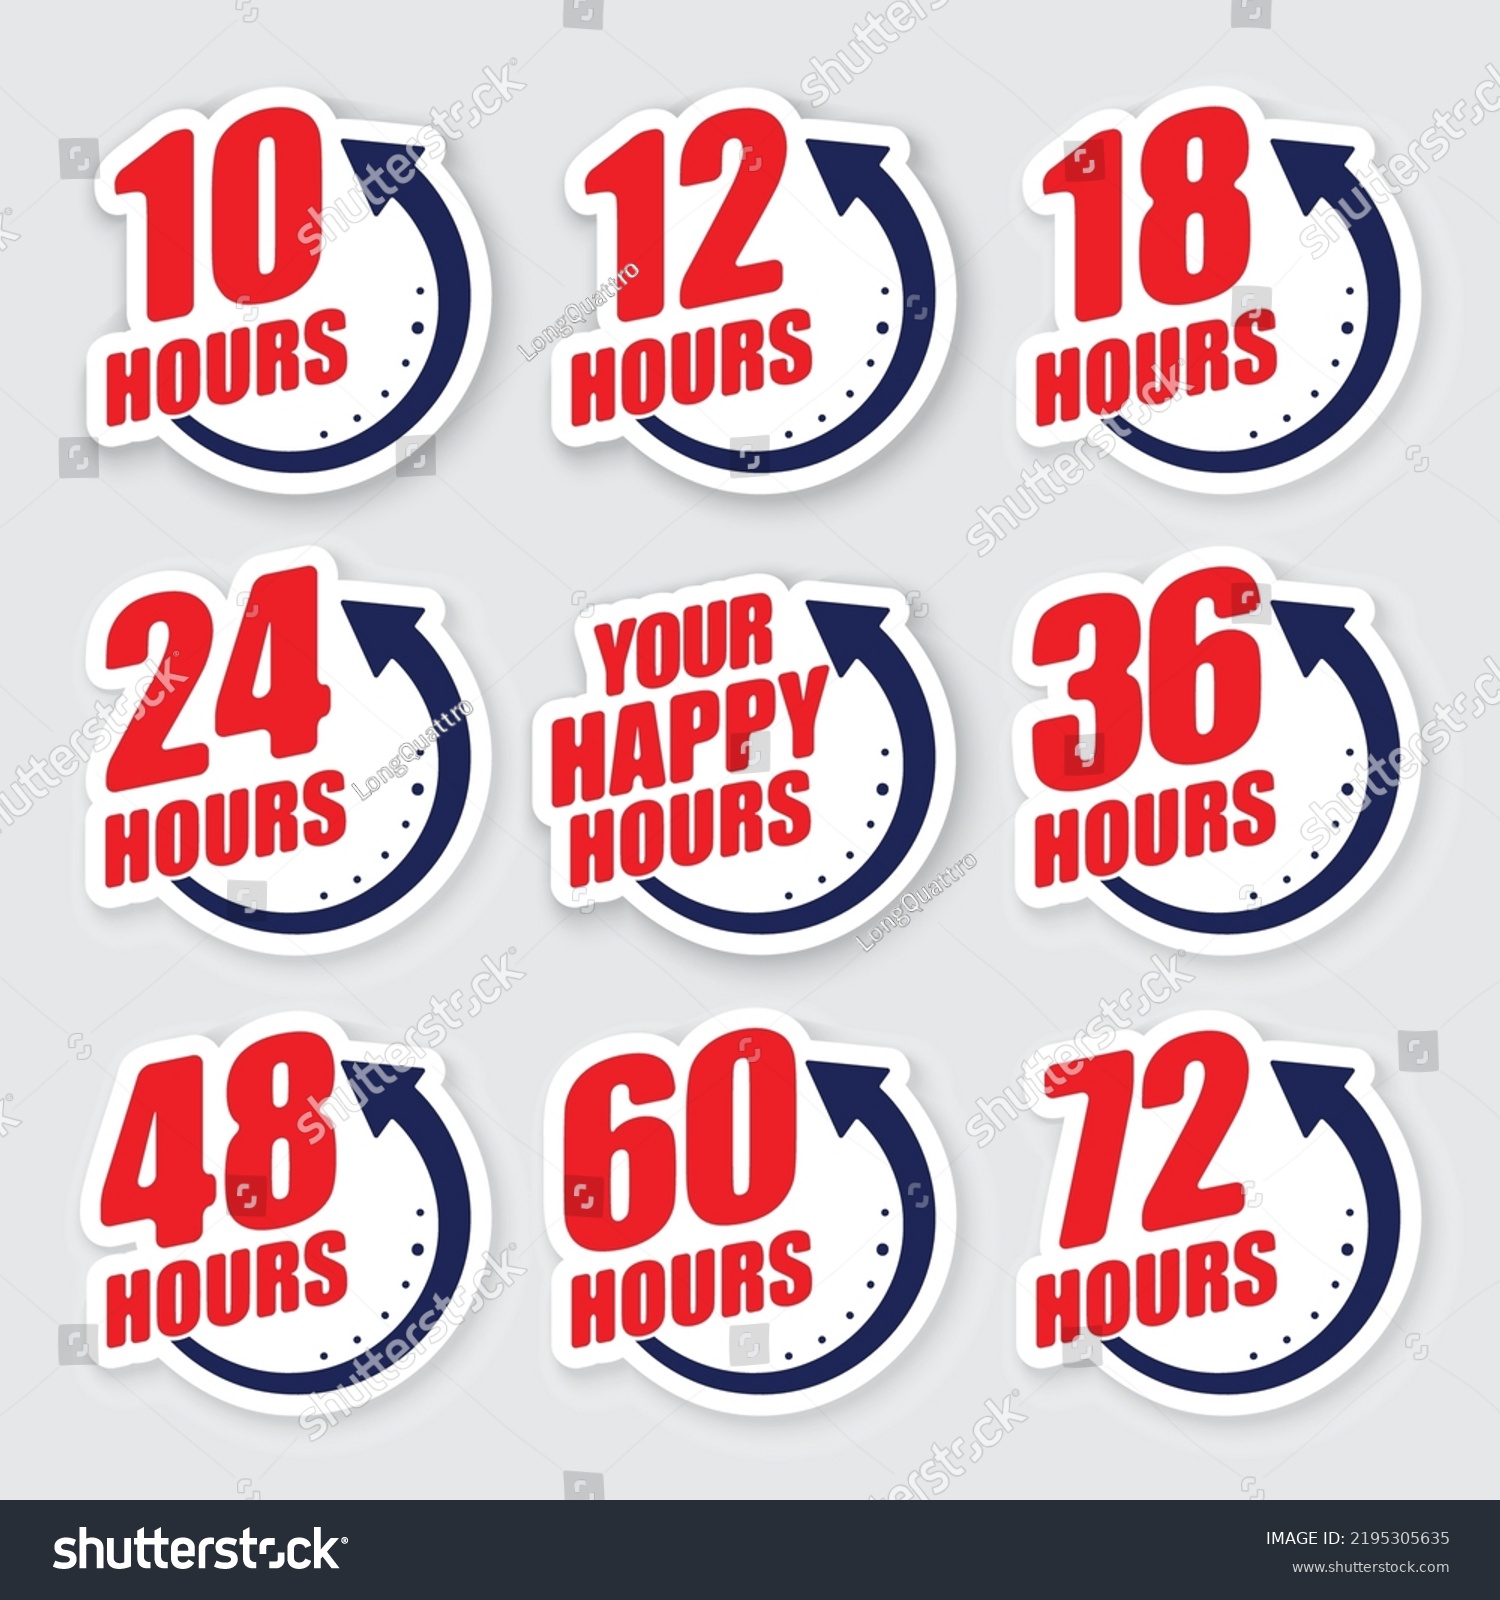 SVG of Set of blue and red abstract clock silhouettes with human hand and different tine numbers. Business hours for work and rest svg